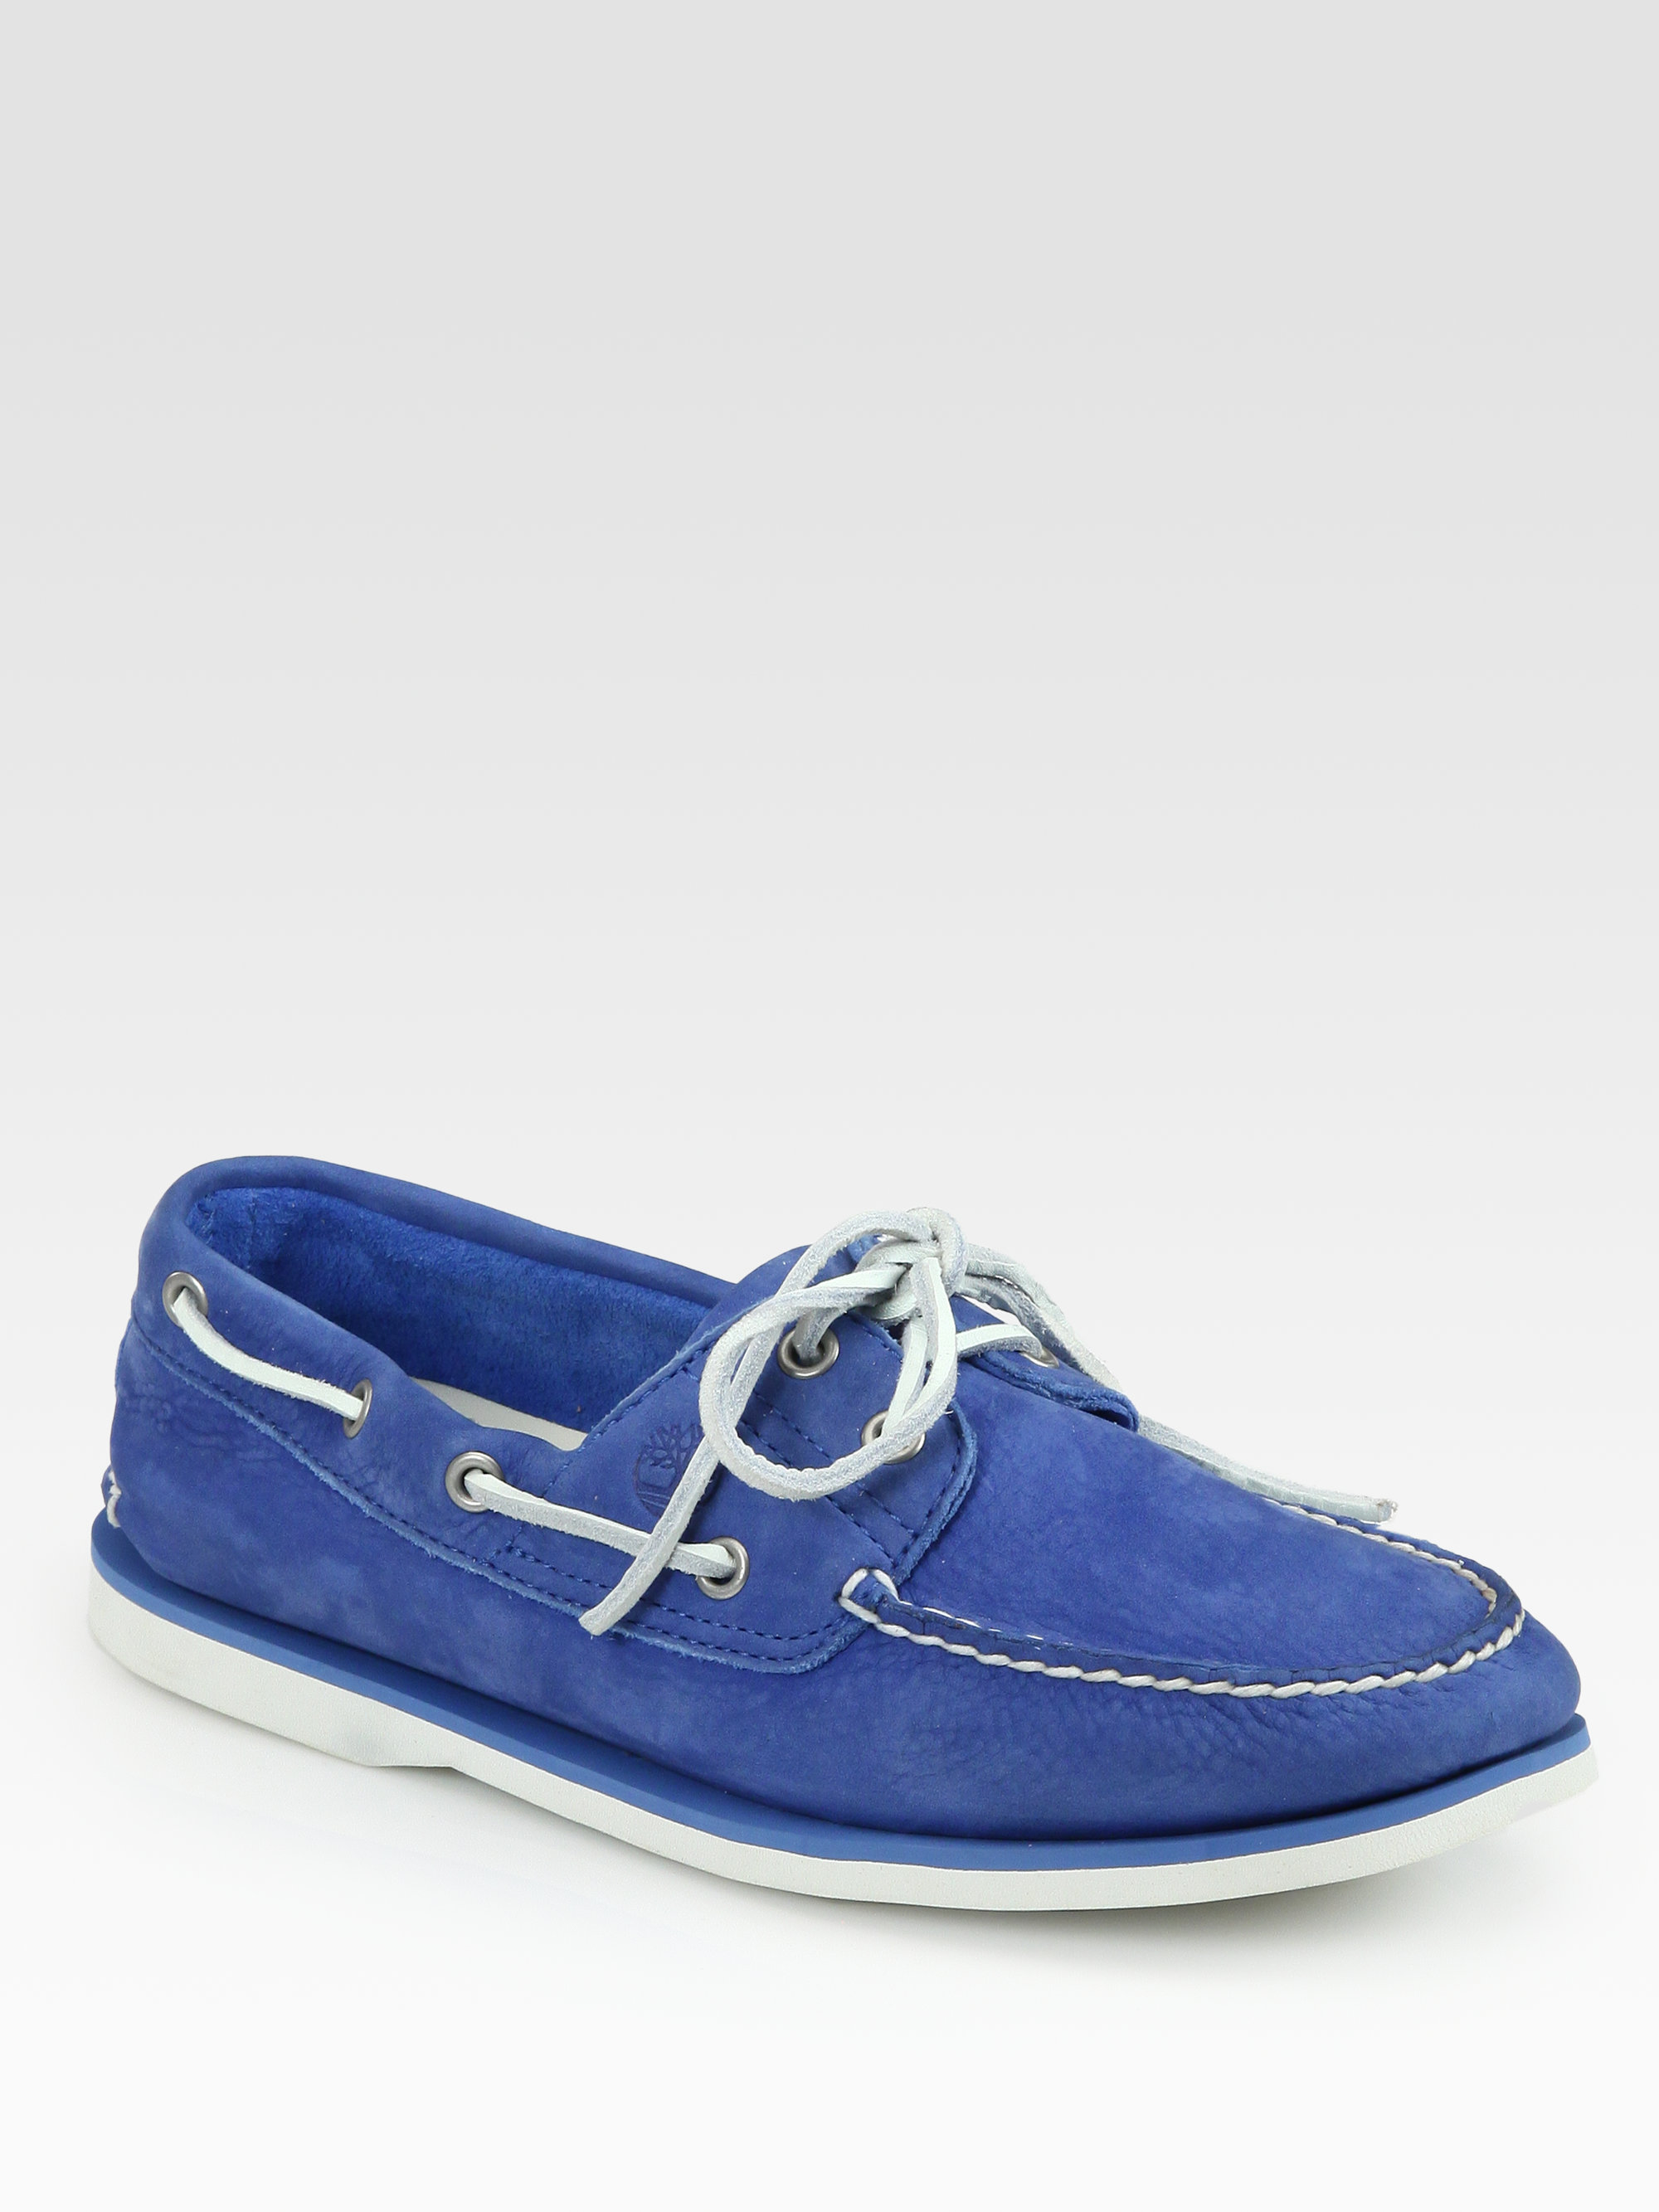 Timberland Classic Two-Eye Boat Shoes in Blue for Men - Lyst